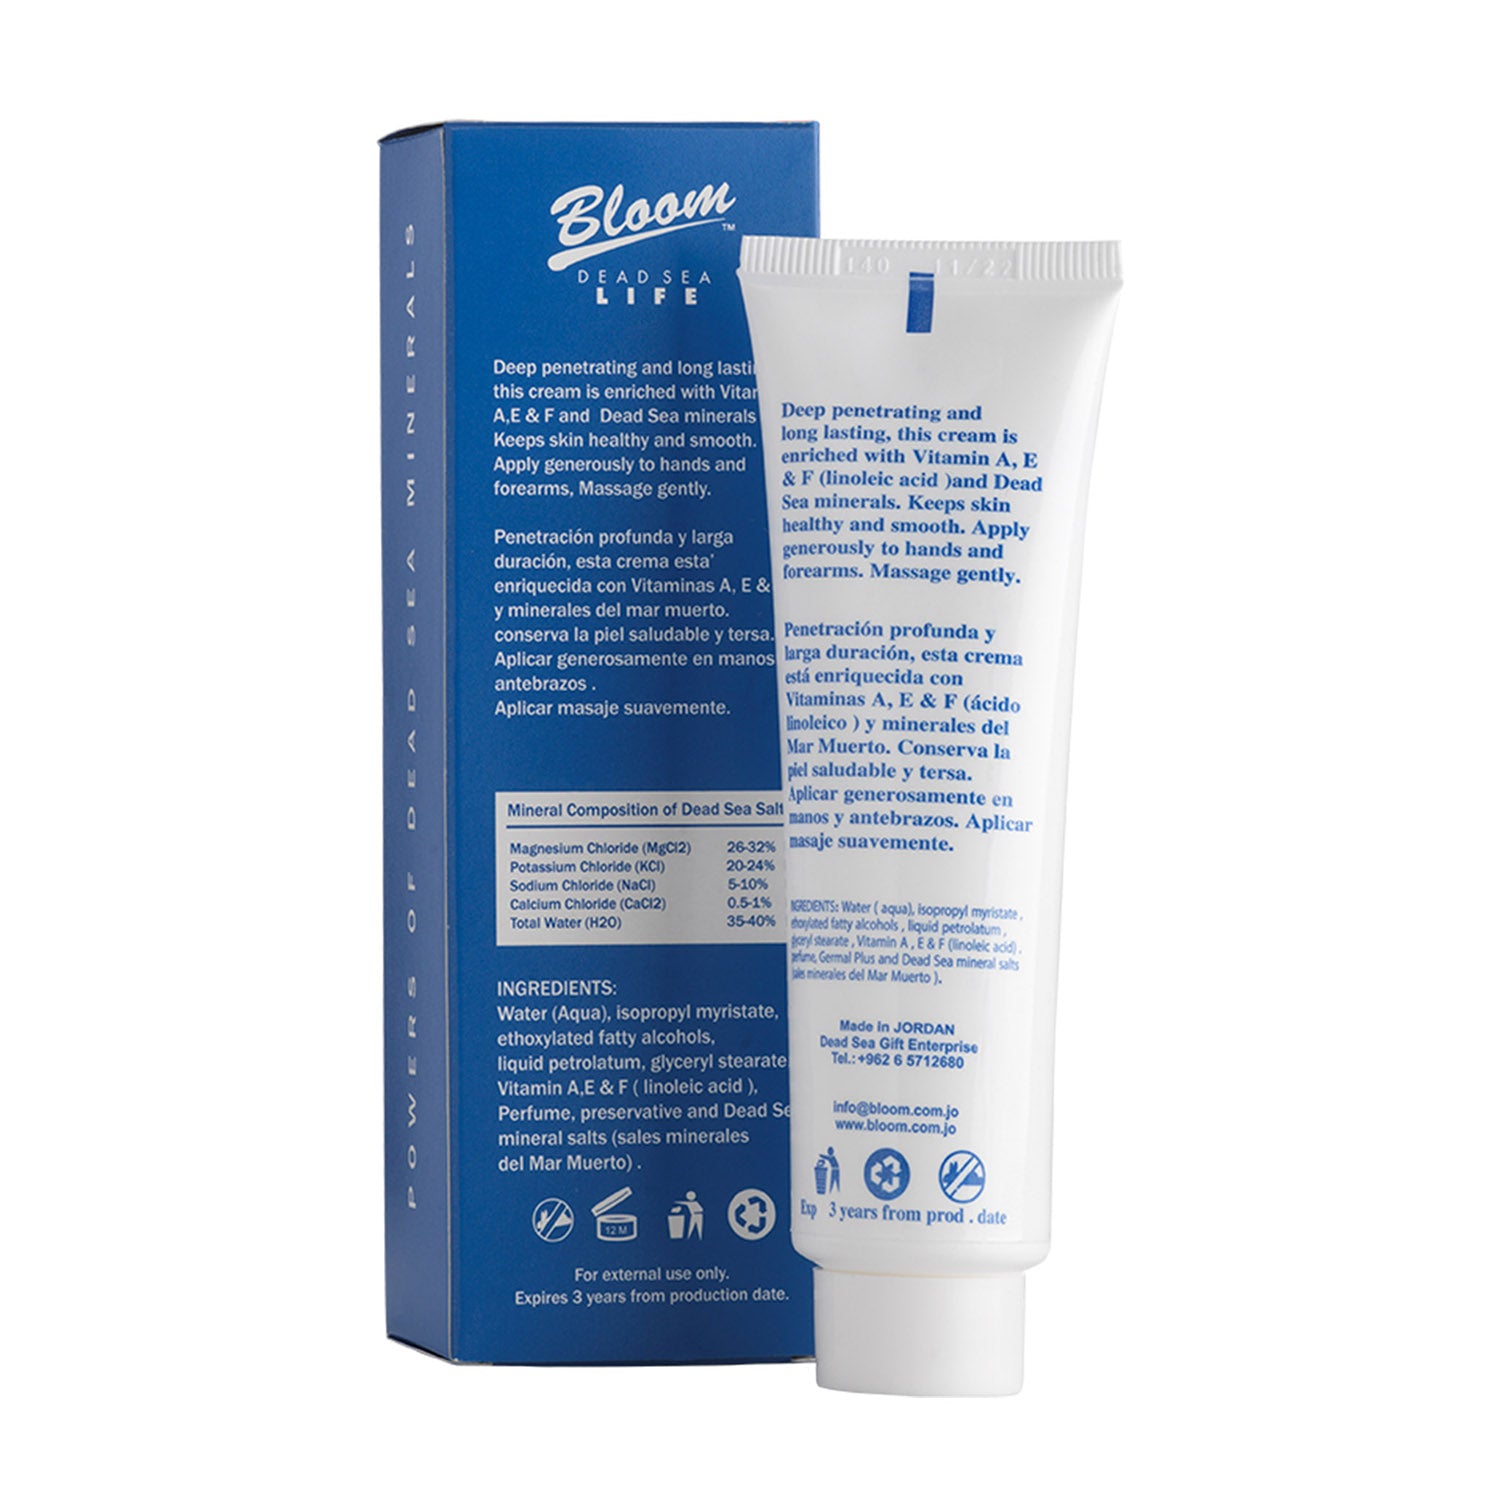 Dead Sea Products Hand Cream Bloom